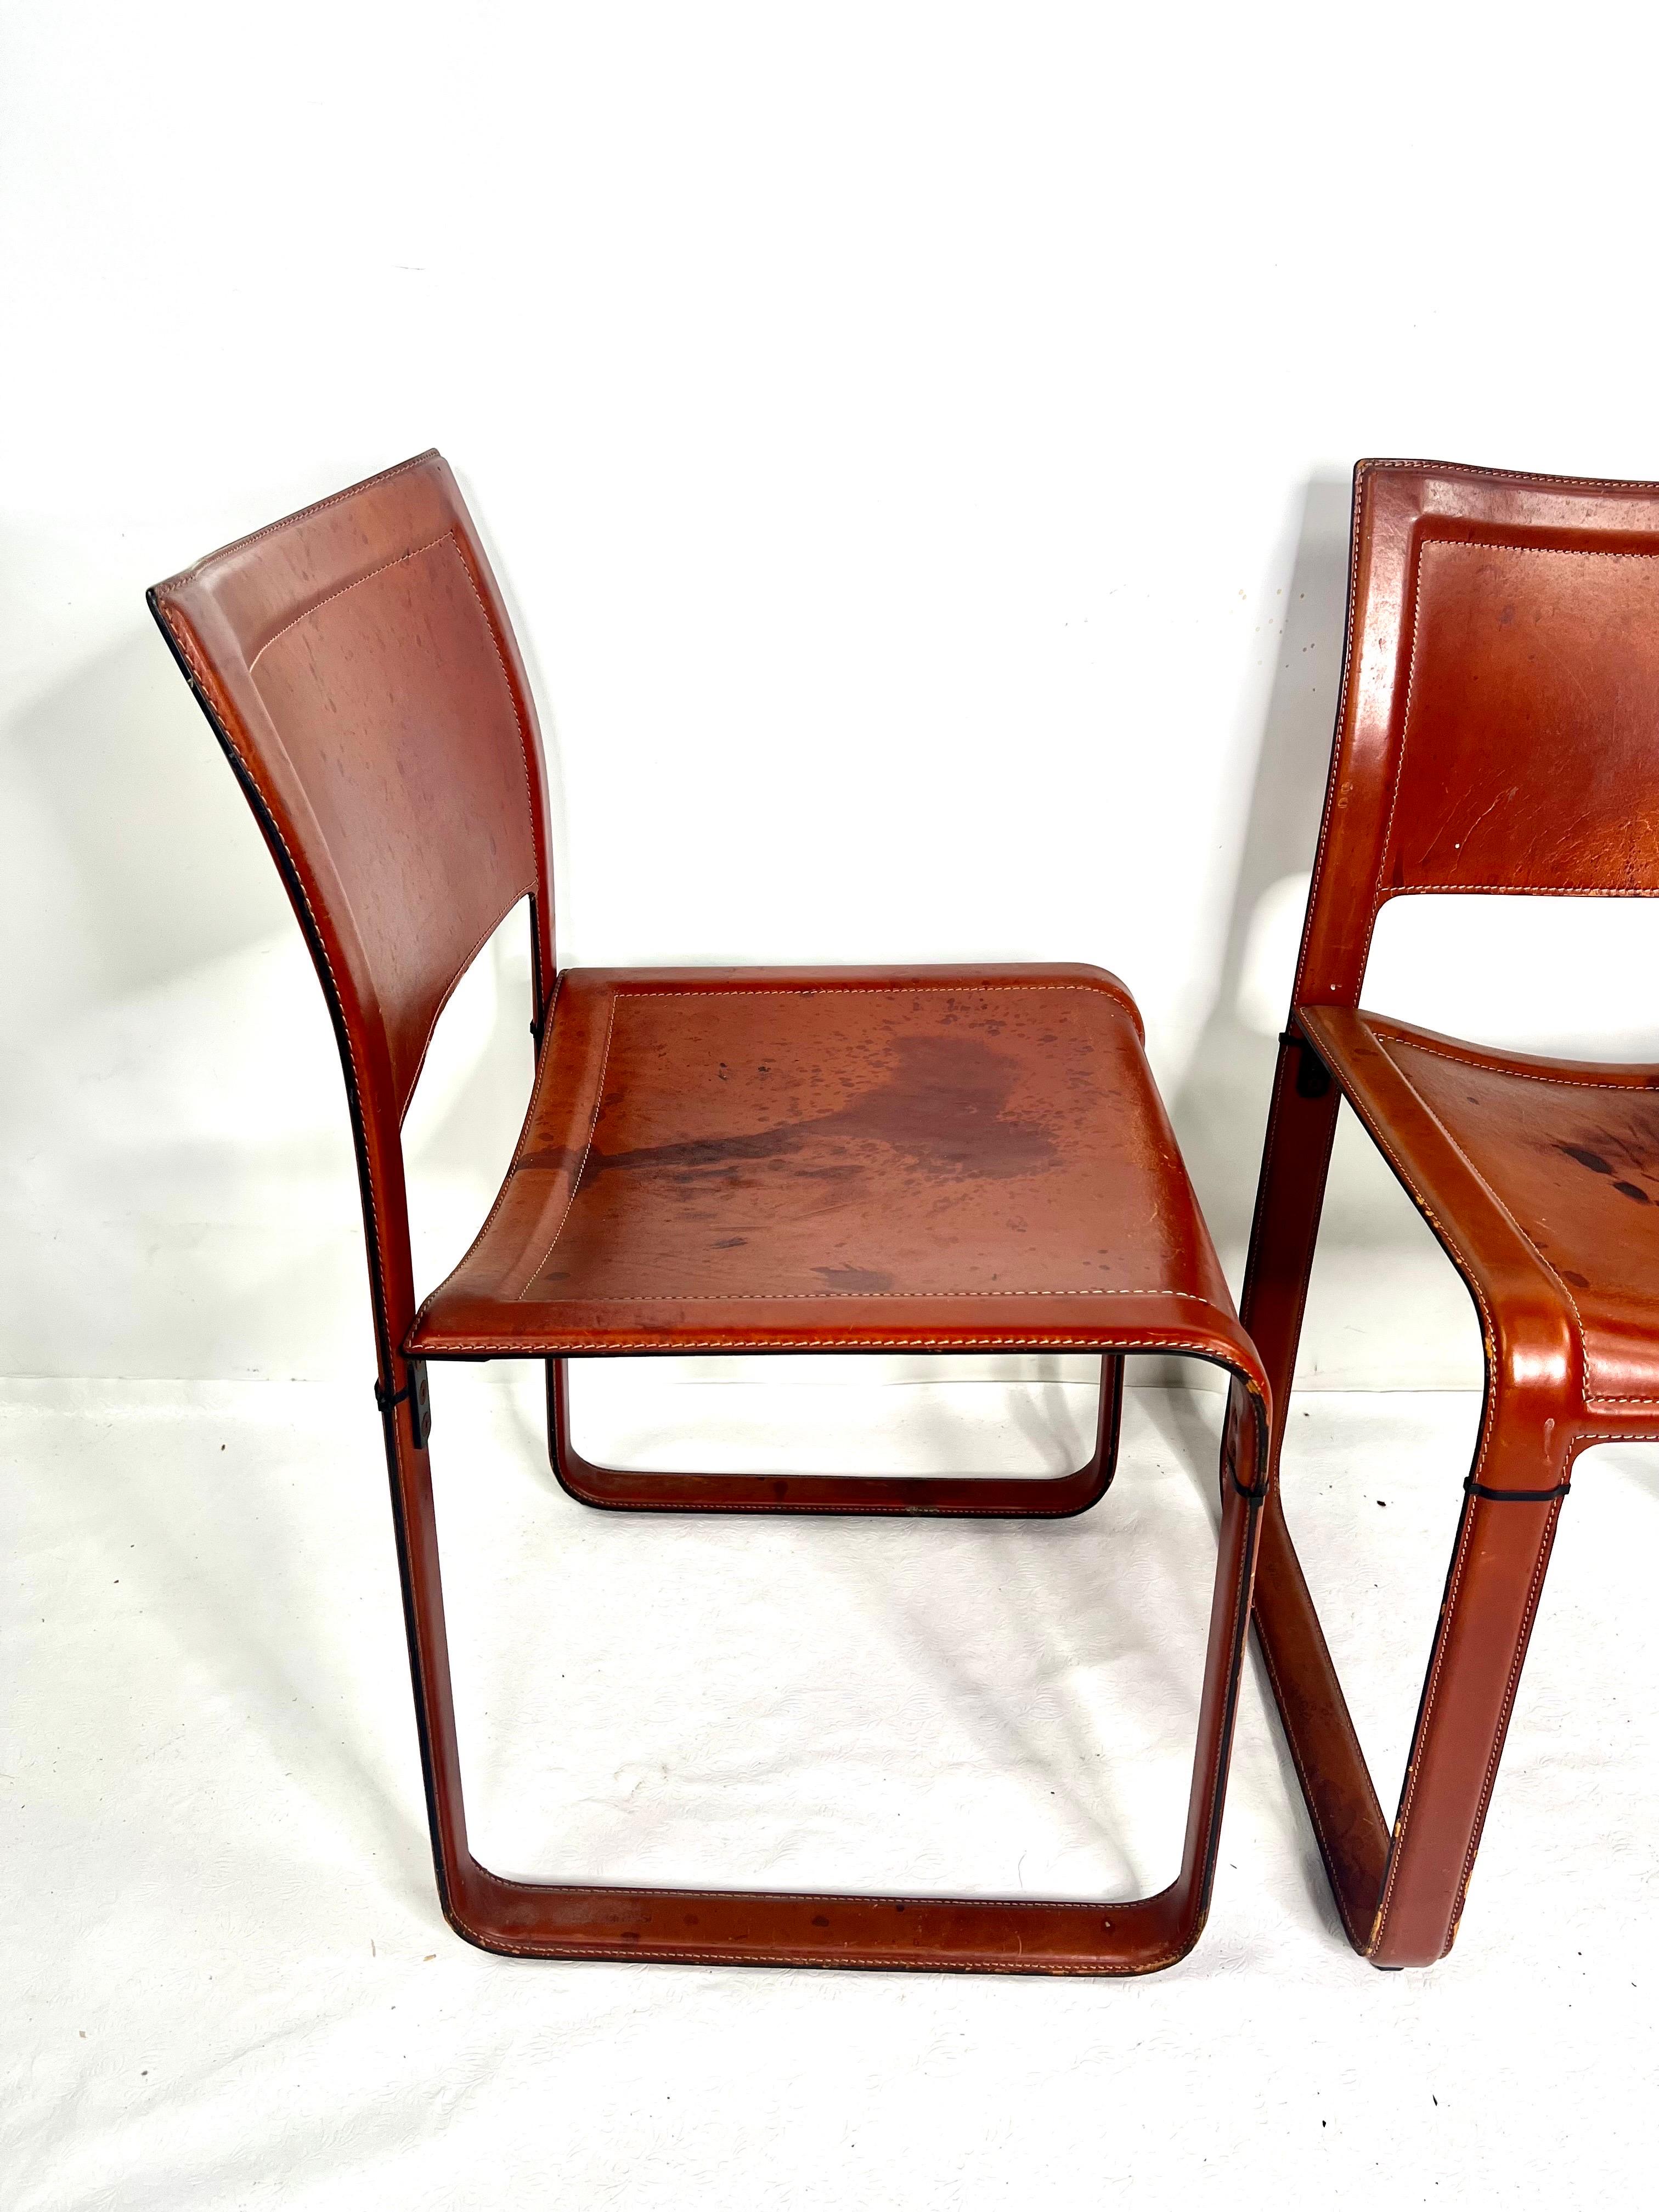 Italian Vintage Modern Matteo Grassi Red Leather Chairs, a Pair For Sale